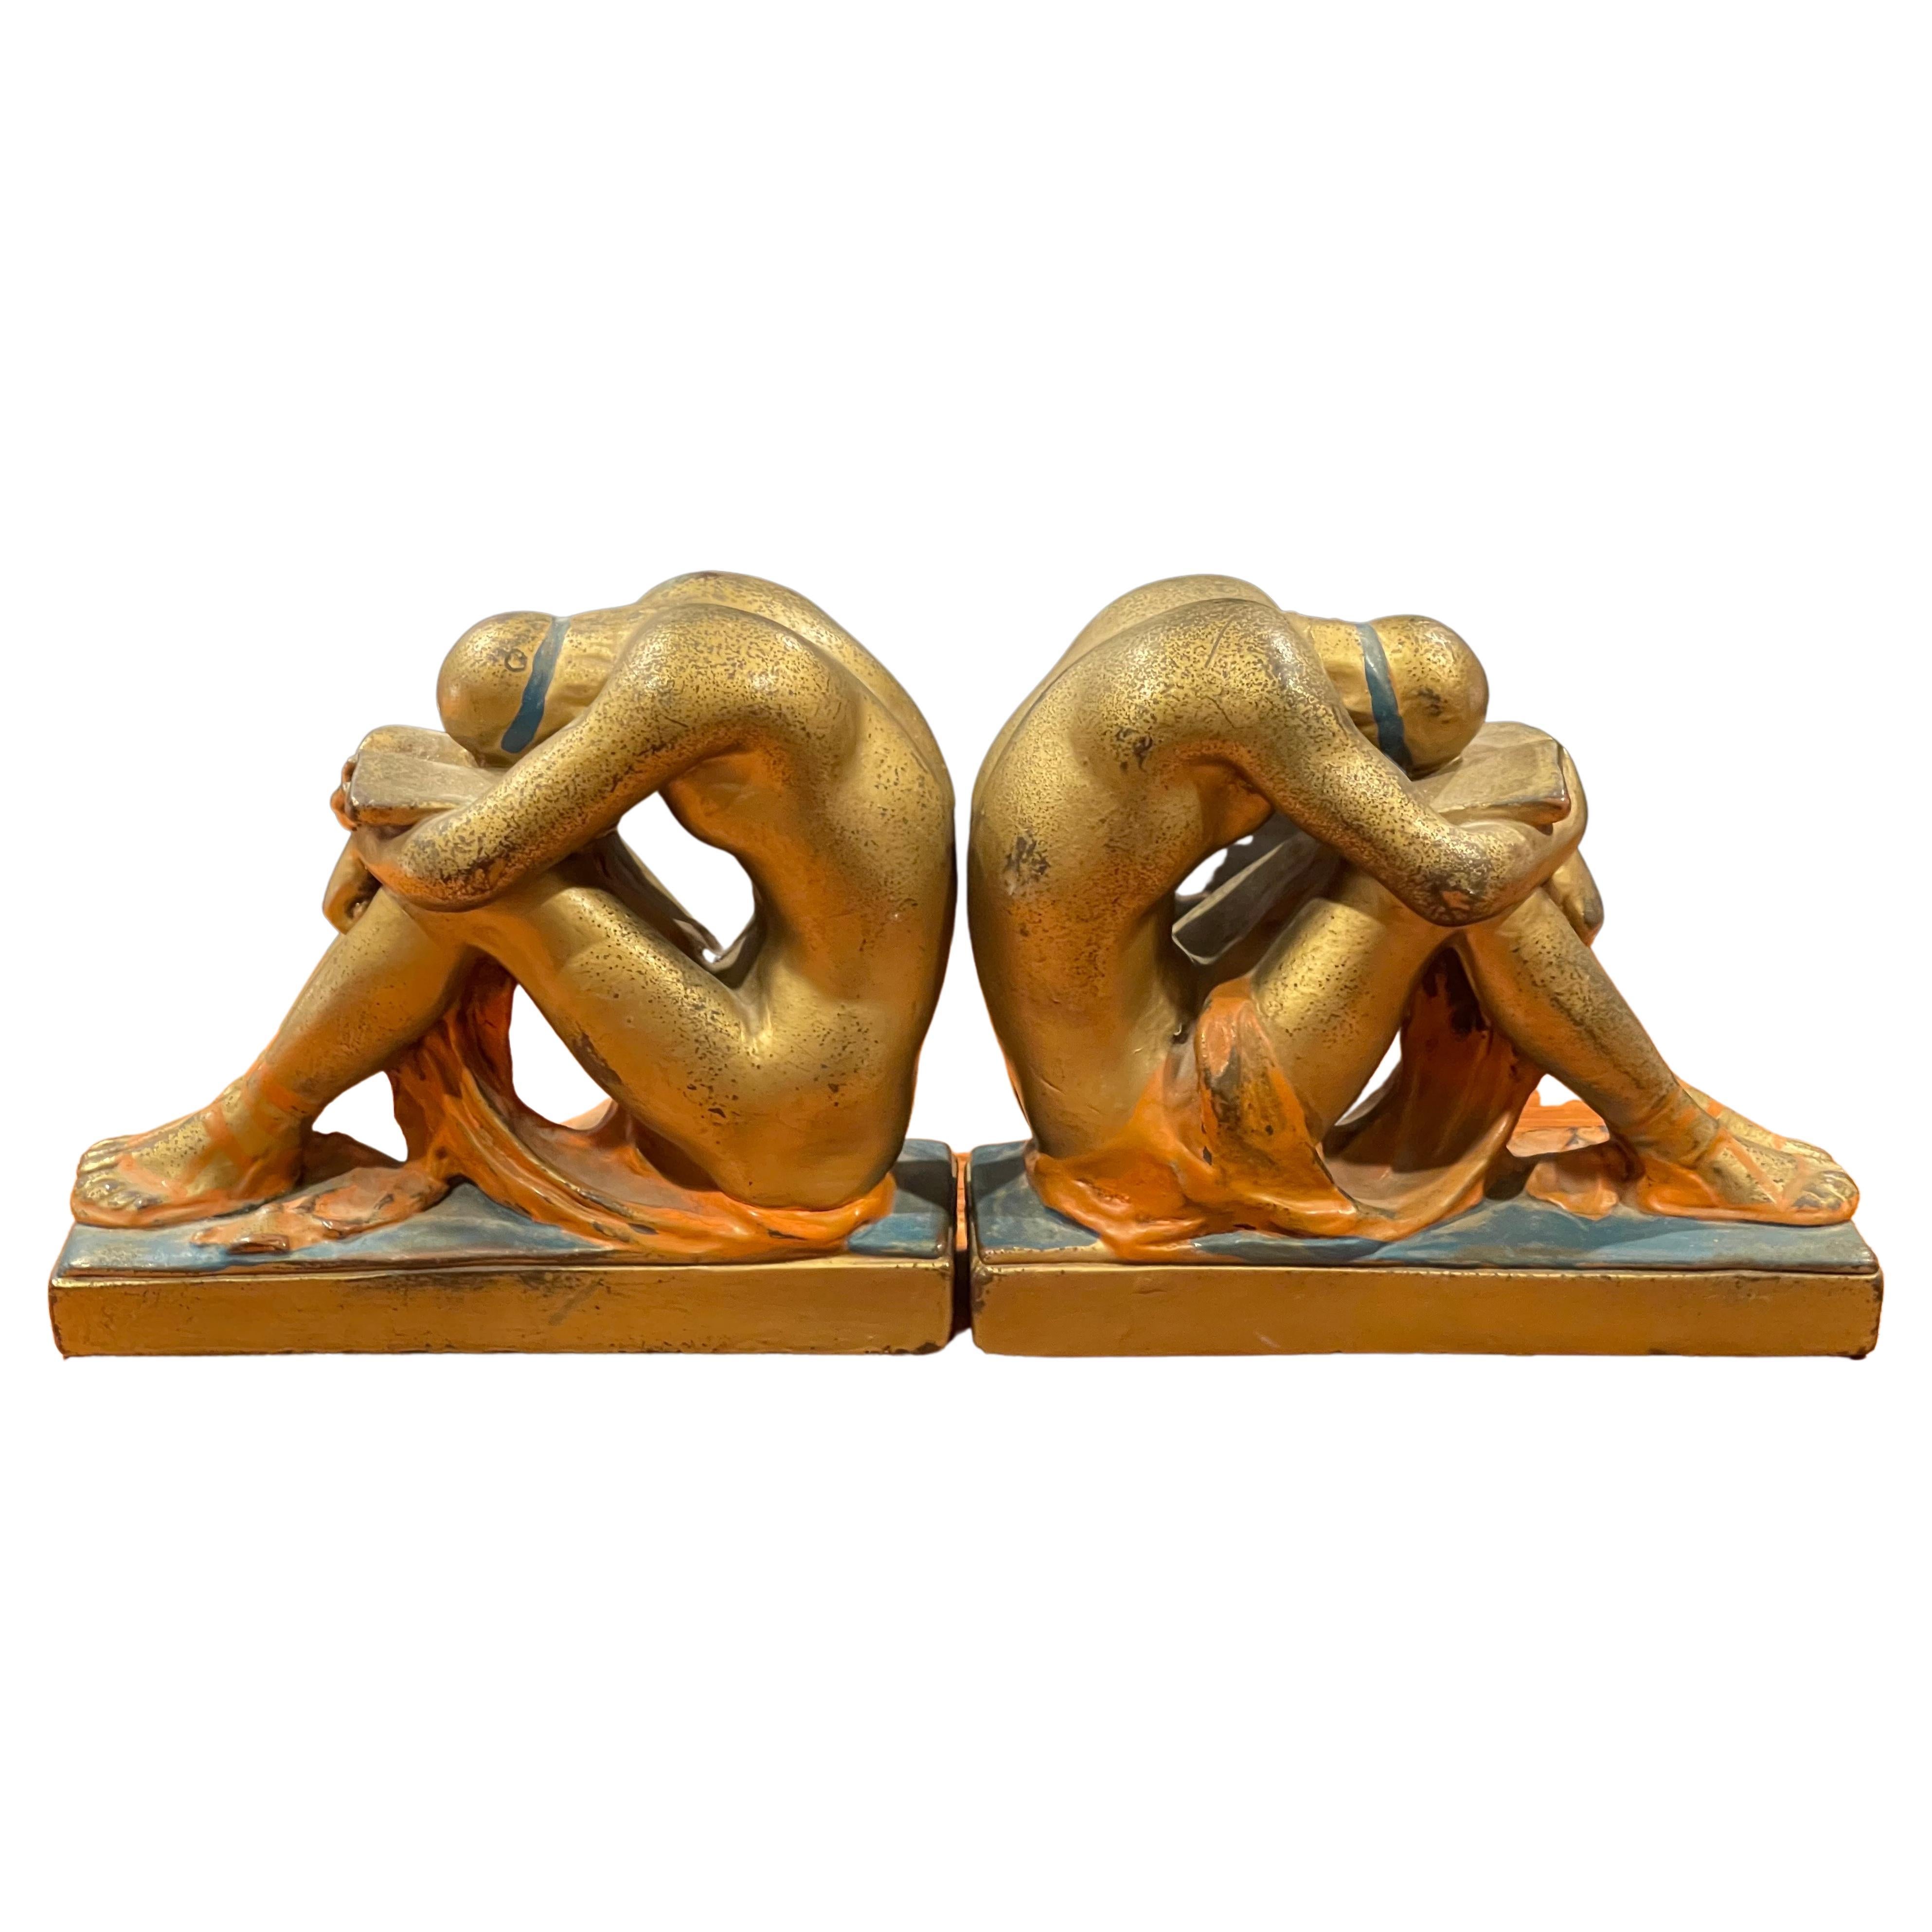 Antique Pair of Solitude / Scholar Bookends in Polychrome Bronze Finish For Sale